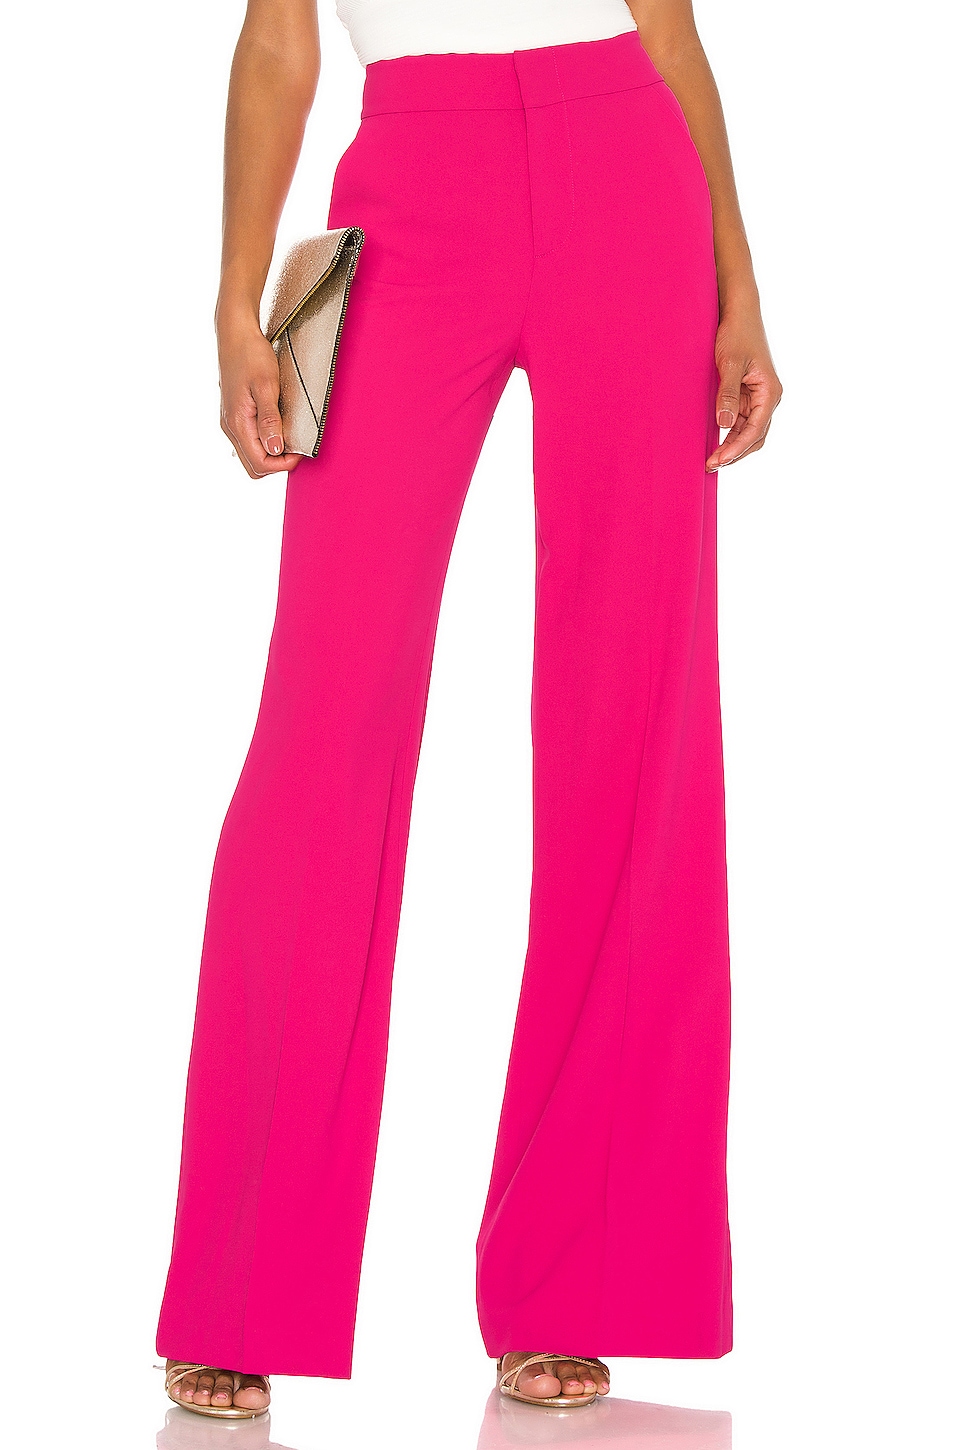 Alice + Olivia Dylan High Waist Wide Leg Pant in Wild Pink | REVOLVE